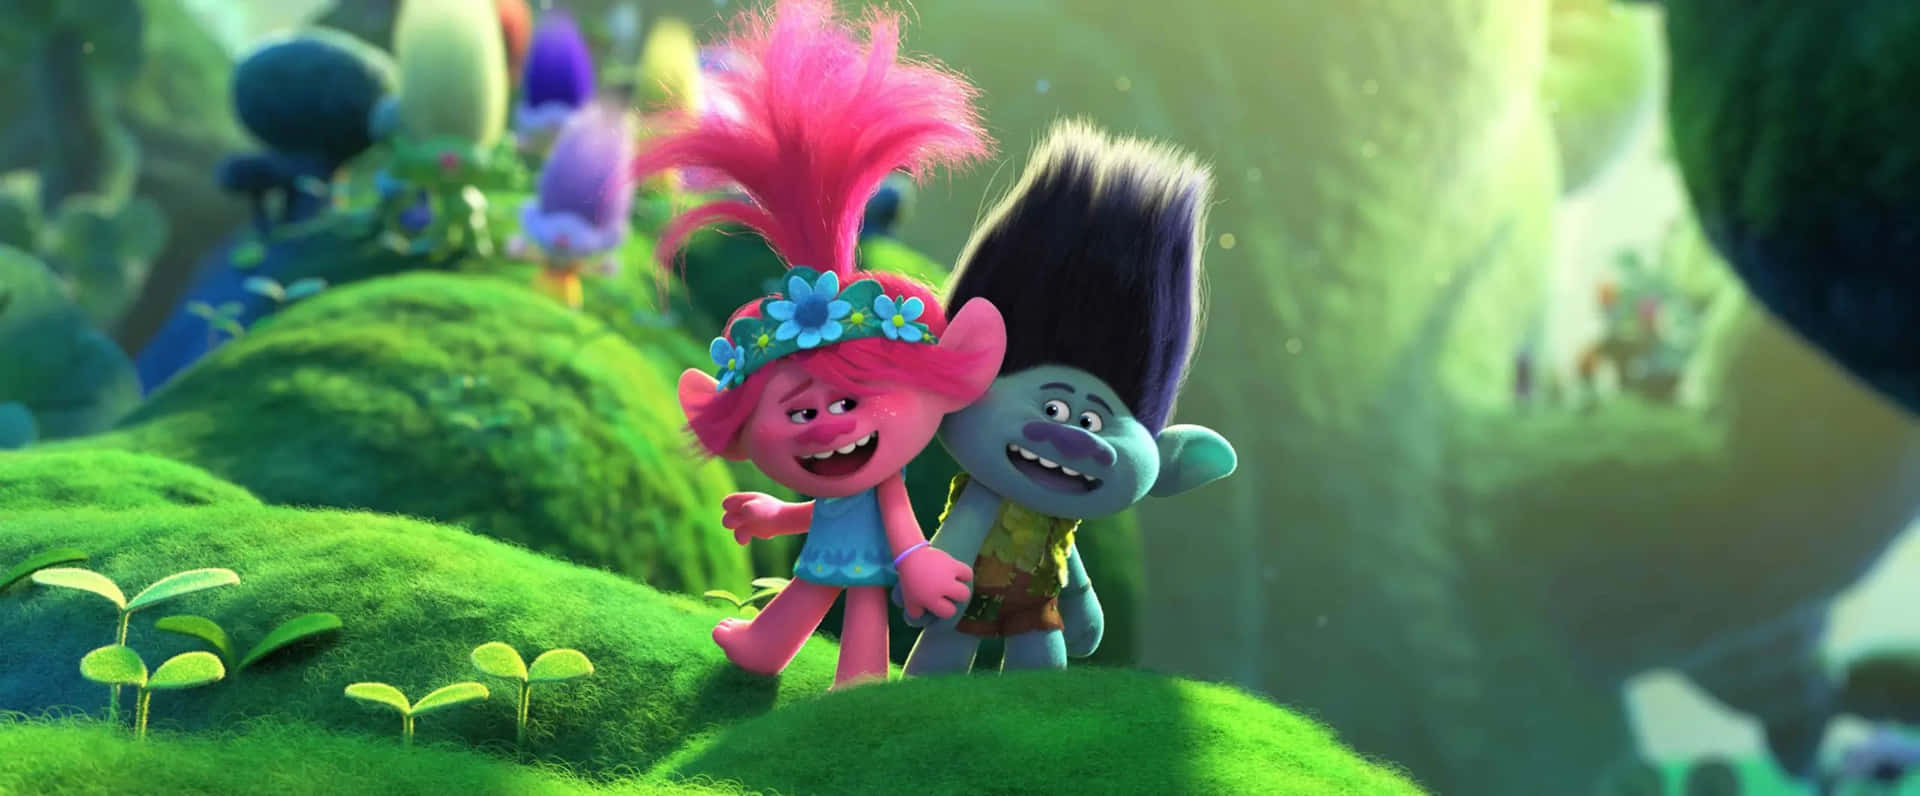 Get ready for the ultimate troll-style holiday with the Trolls World Tour! Wallpaper